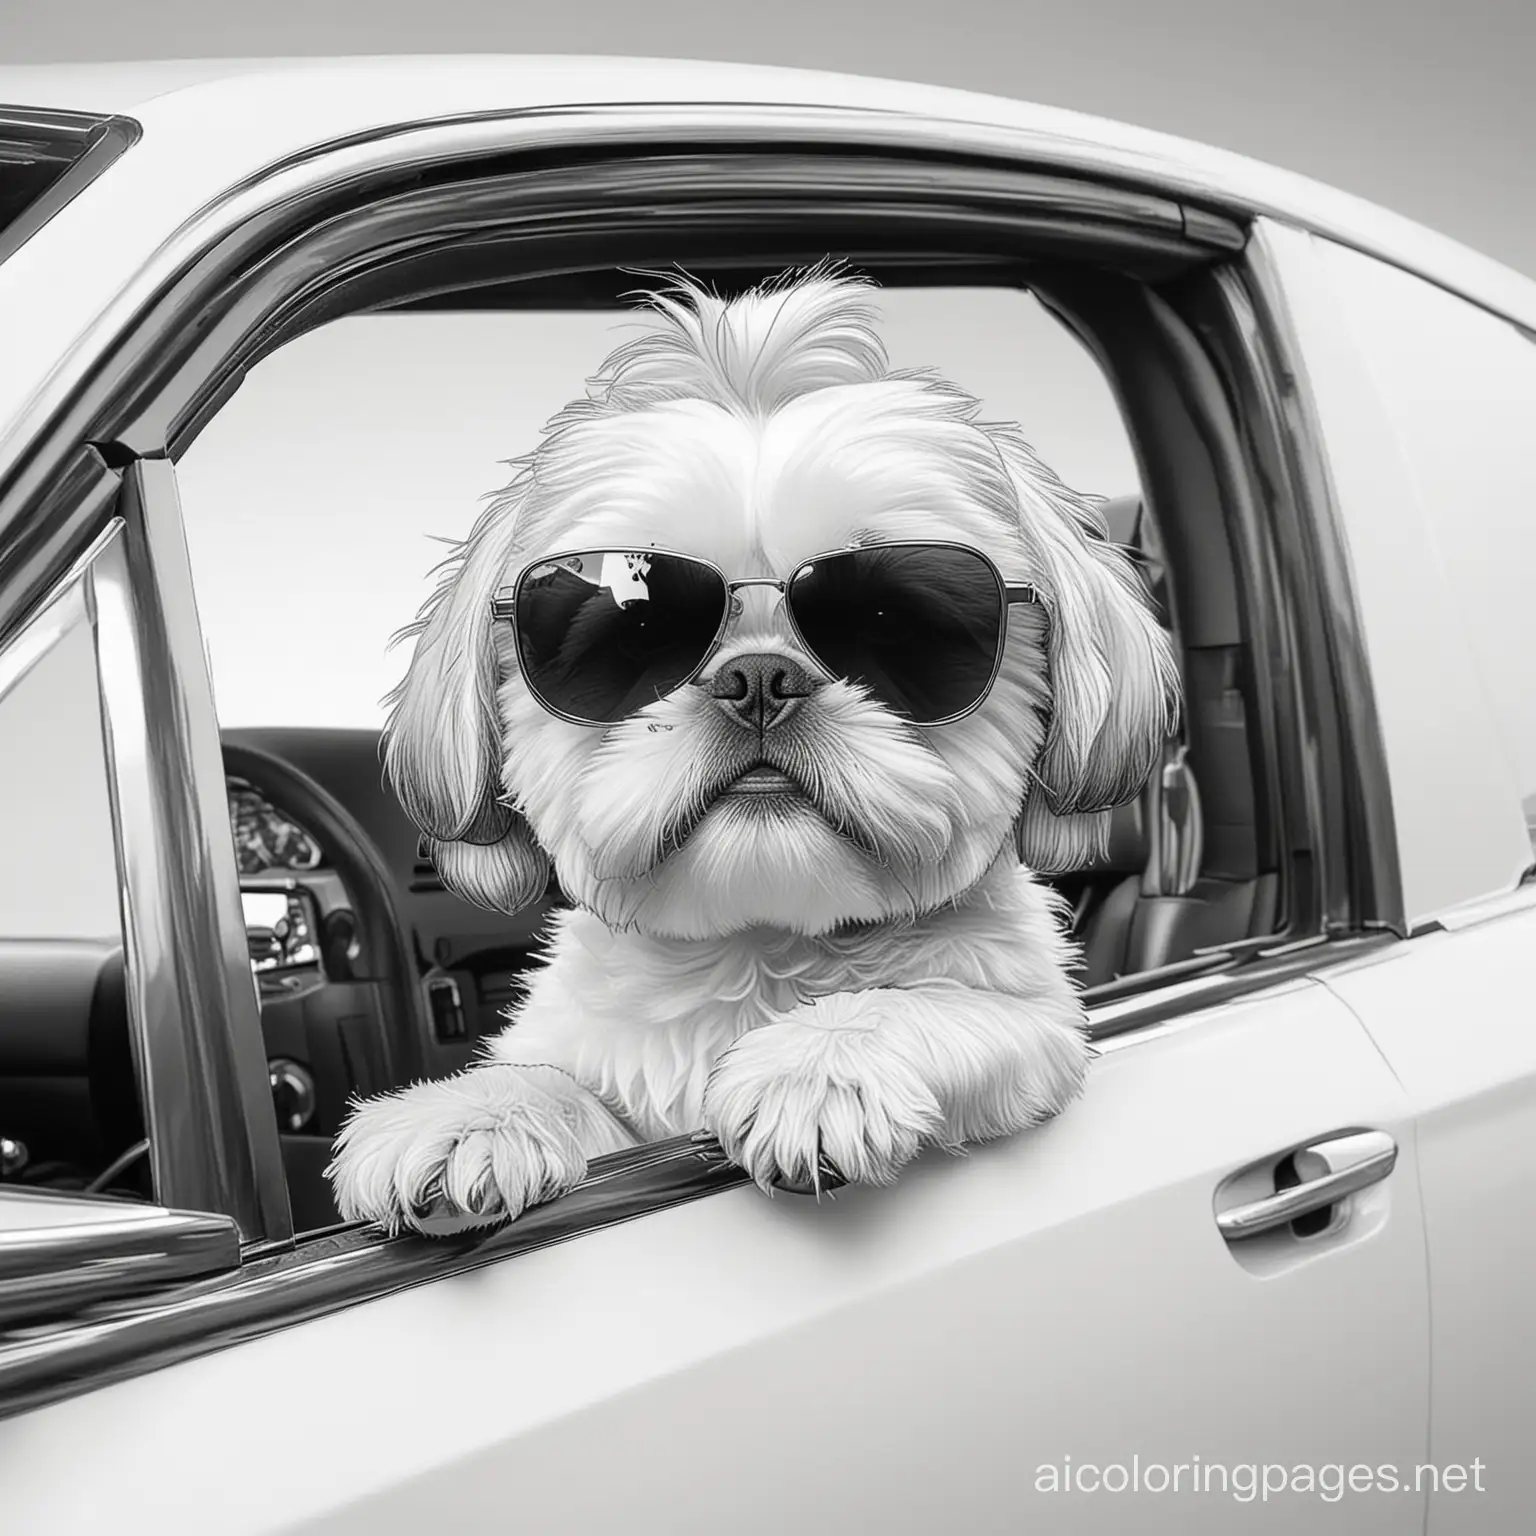 shih tzu with sunglasses in luxury car window, Coloring Page, black and white, line art, white background, Simplicity, Ample White Space. The background of the coloring page is plain white to make it easy for young children to color within the lines. The outlines of all the subjects are easy to distinguish, making it simple for kids to color without too much difficulty